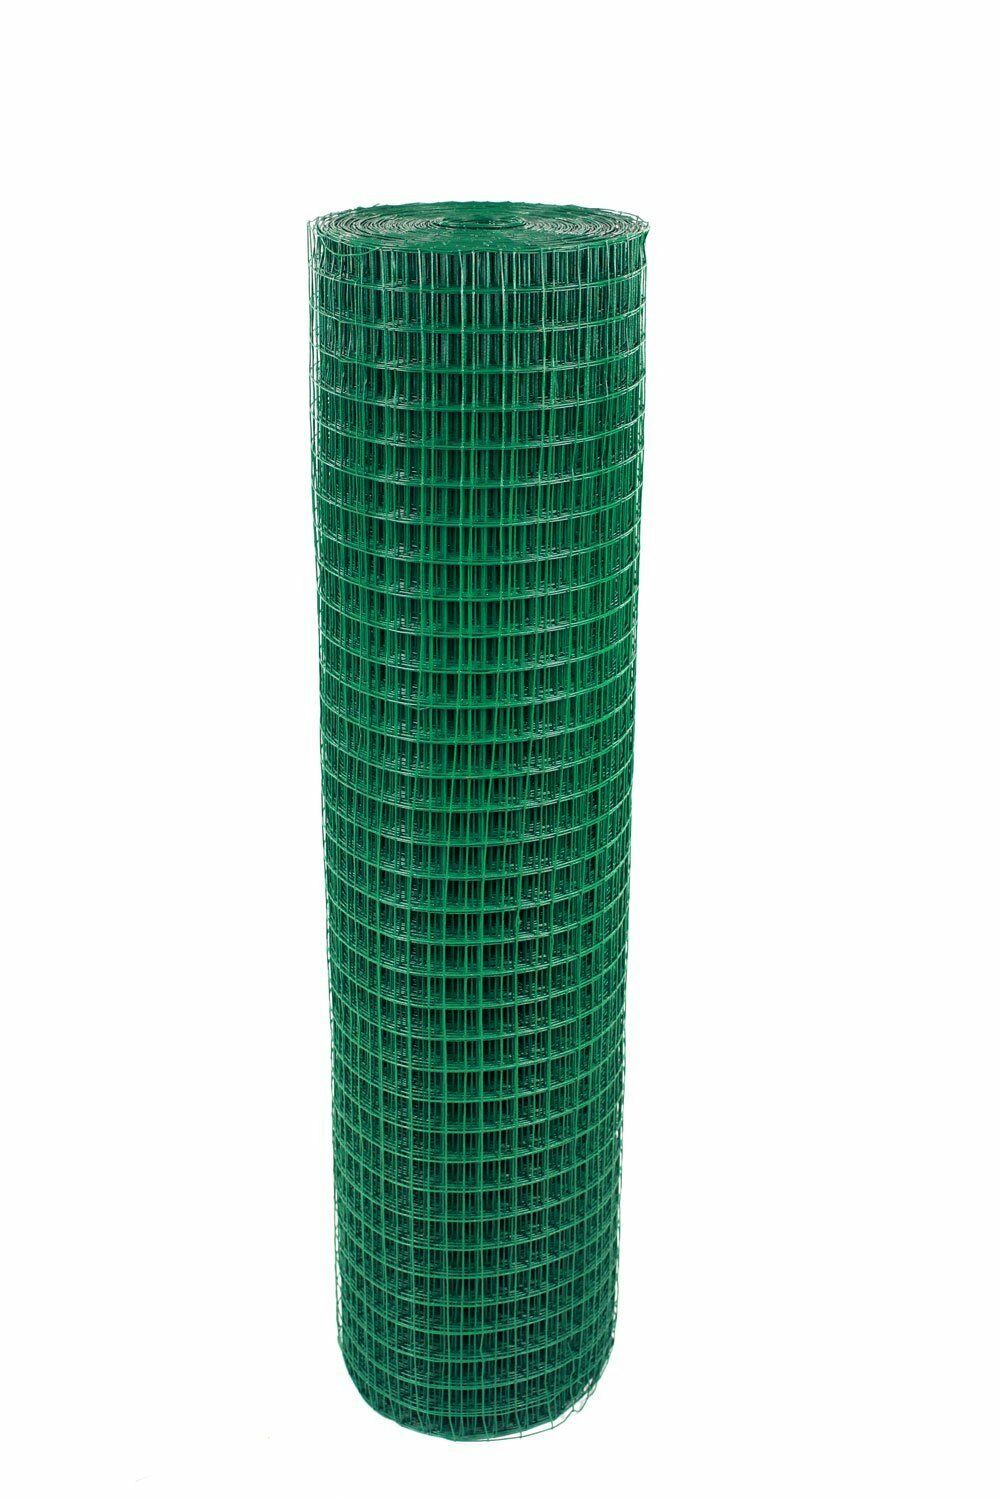 PVC Coated Mesh Wire Green Fencing 90/120cm Garden Galvanised Fence Net 30/45 M